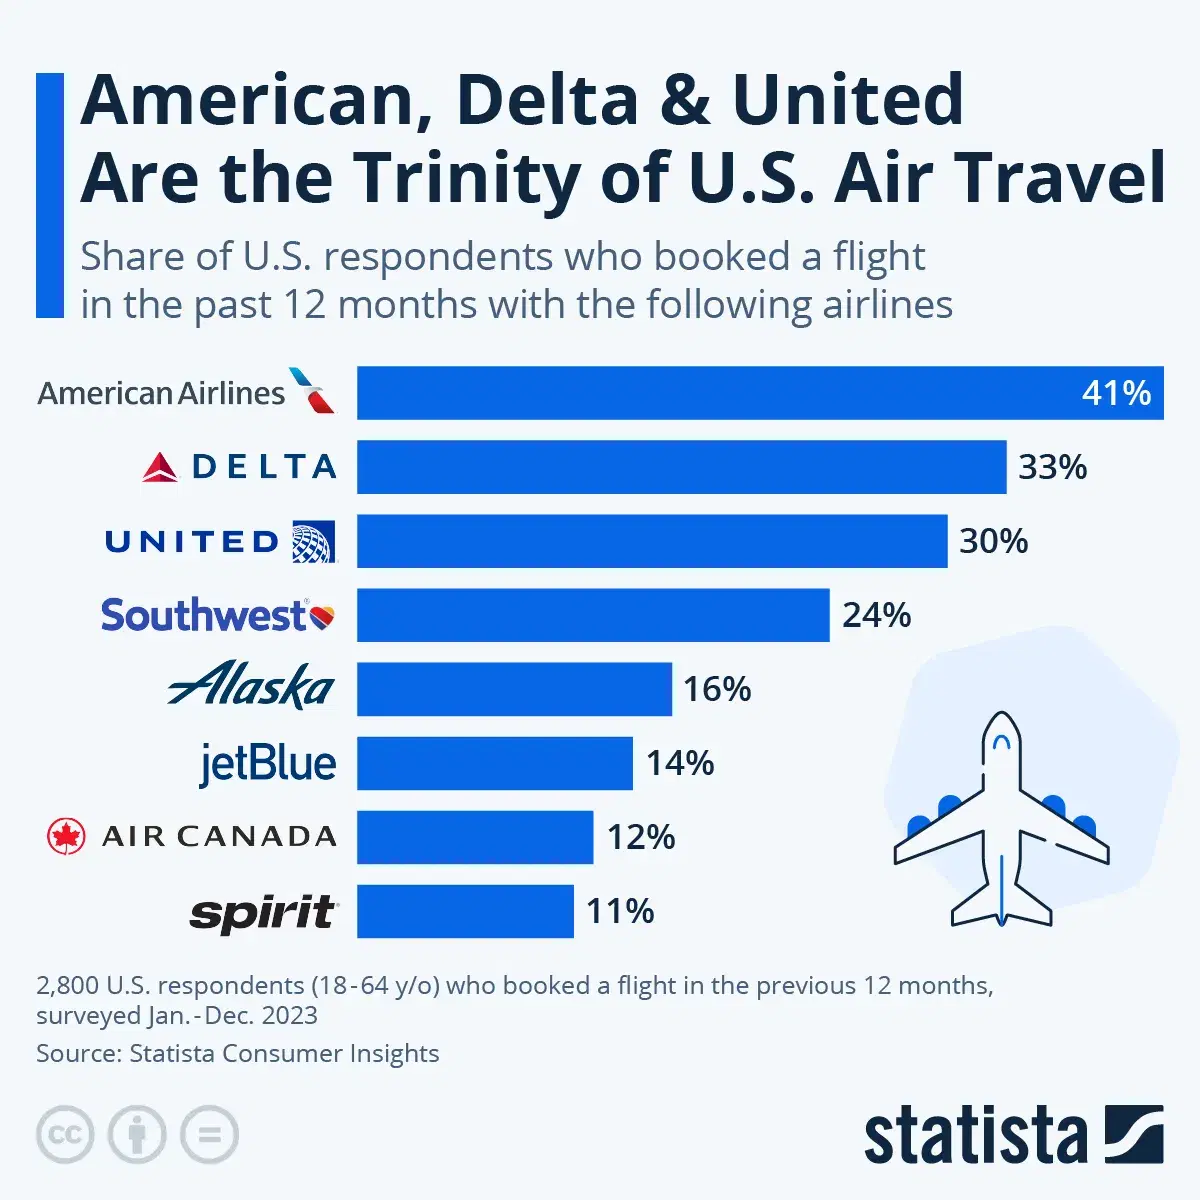 American, Delta & United Are the Trinity of U.S. Air Travel